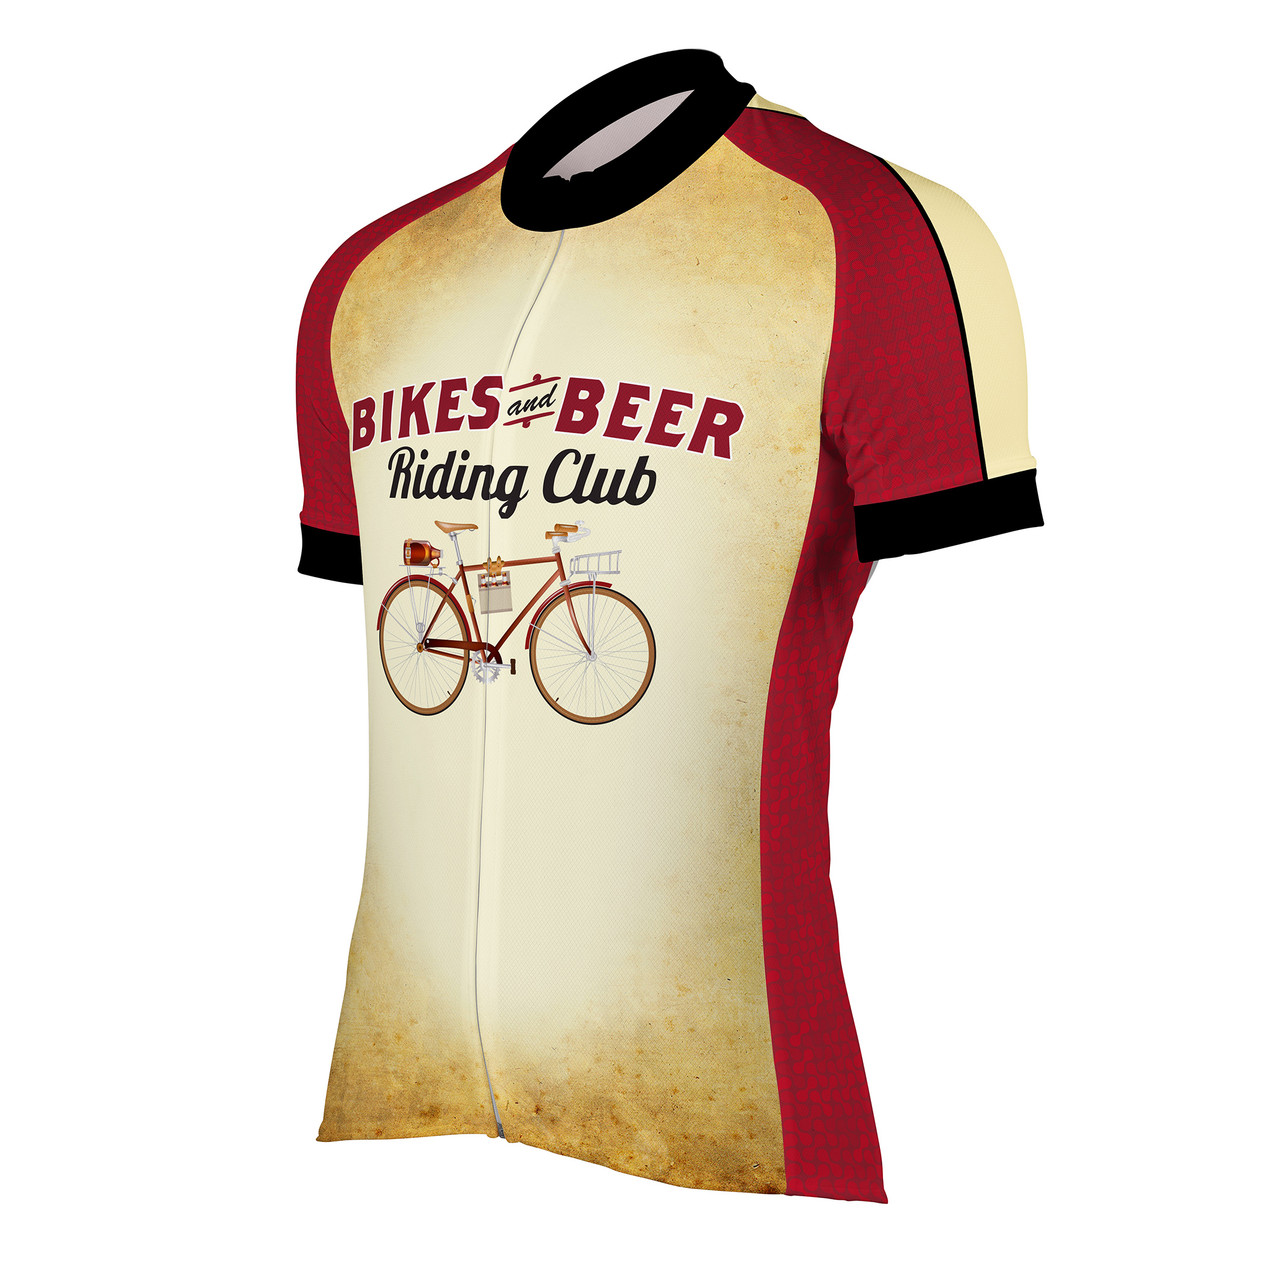 Bikes & Beers Riding Club Men's Cycling Jersey